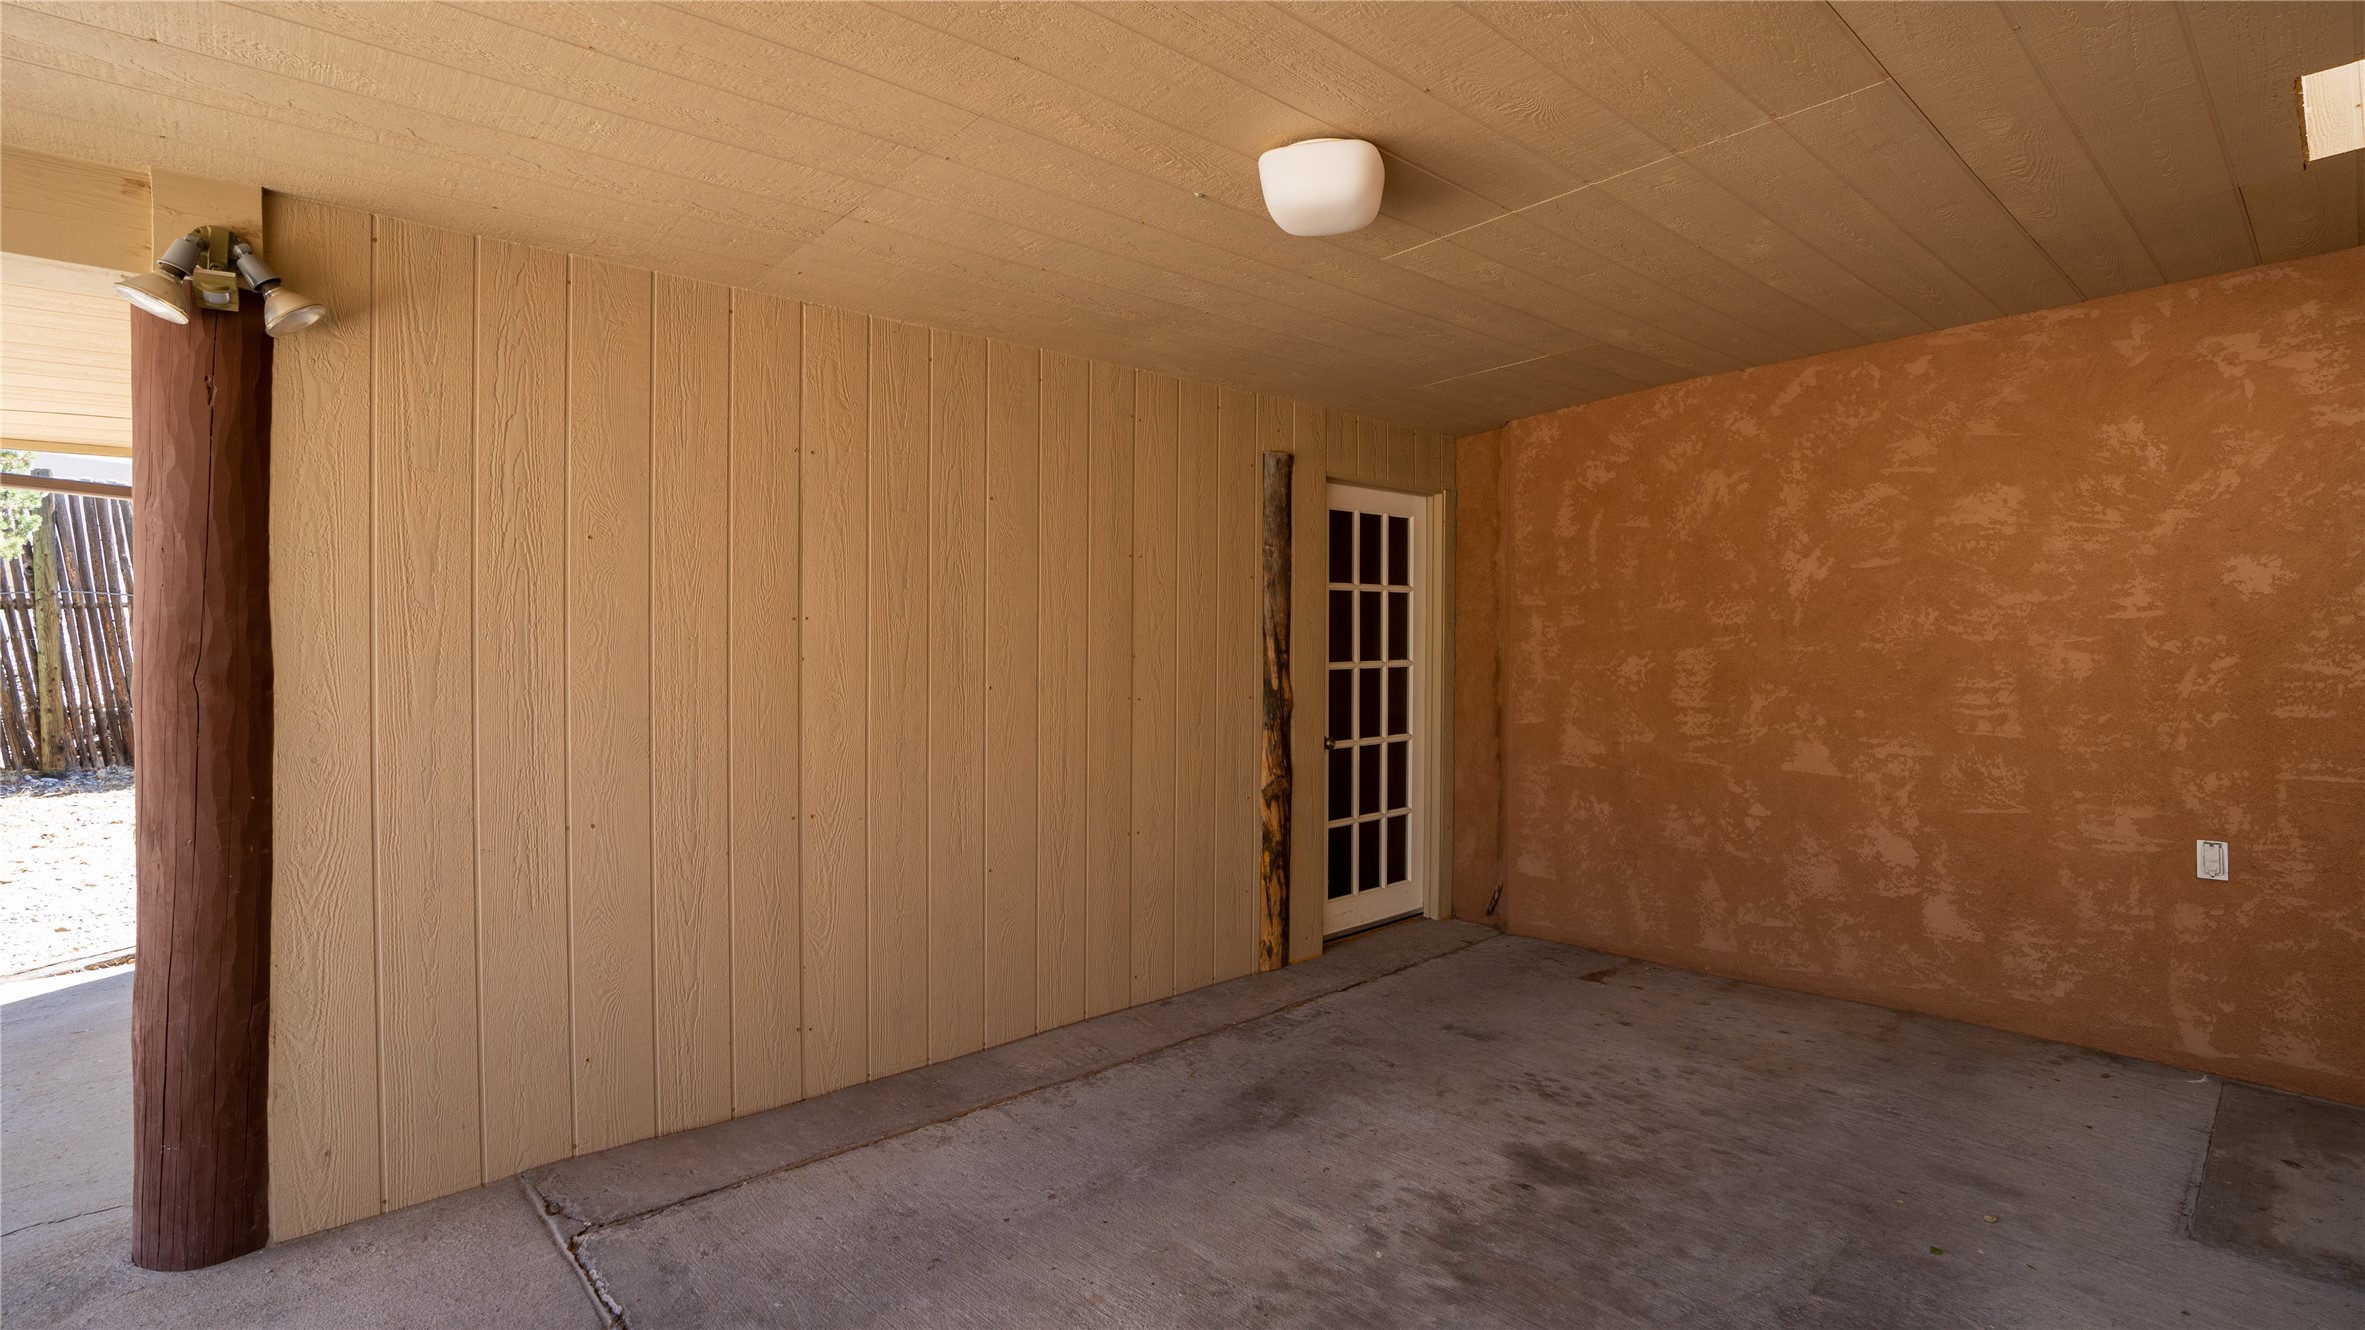 Carport and attached Storage Room